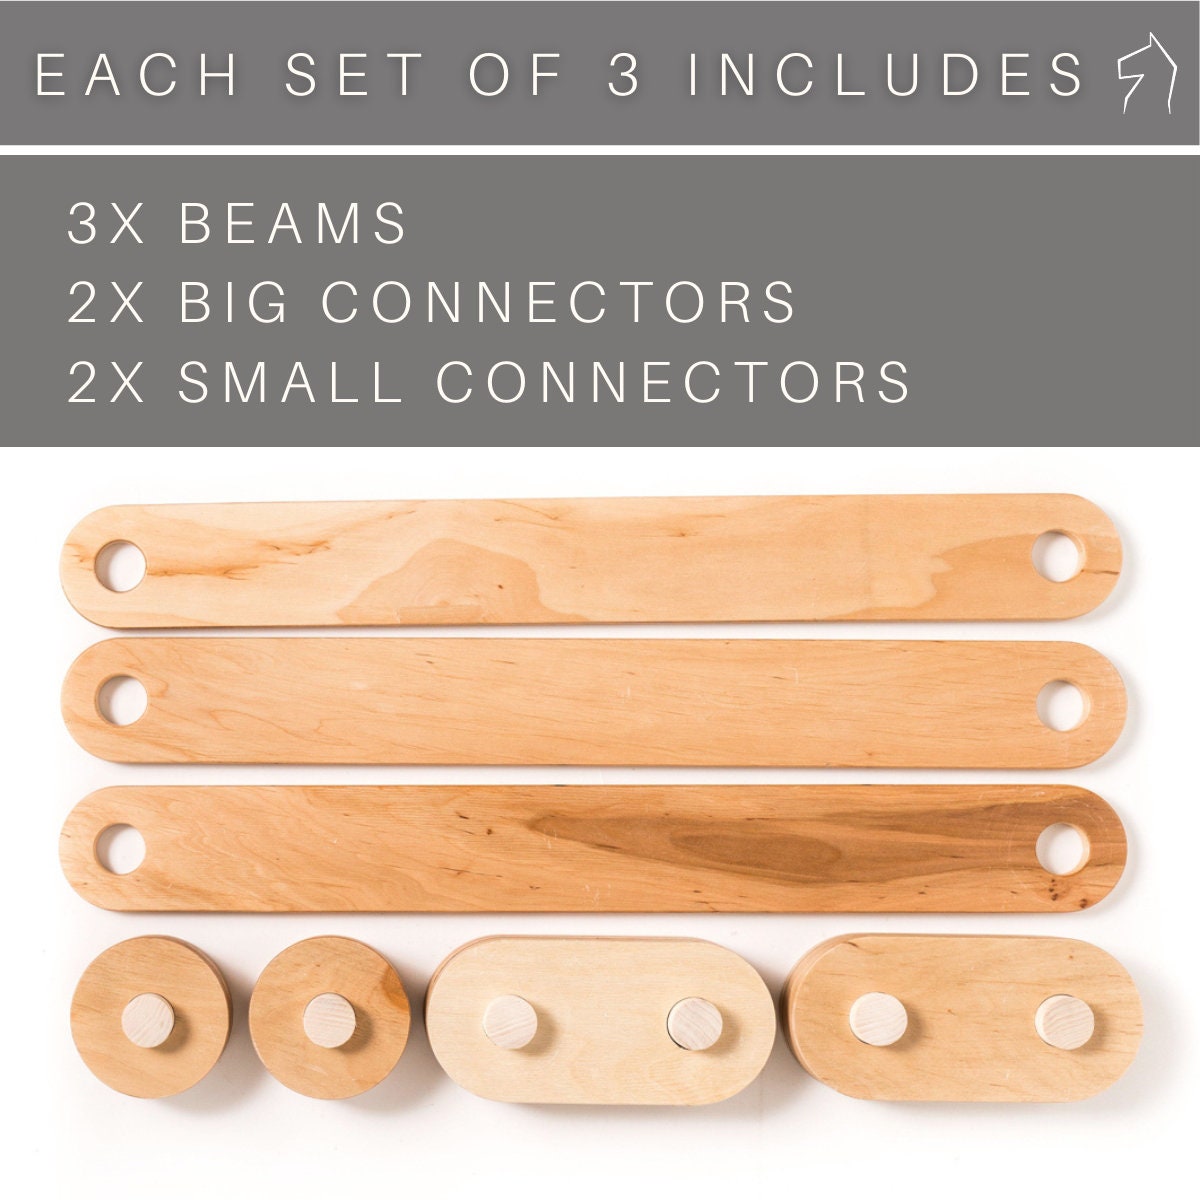 Pieces of wooden balance beam set for children with text describing pieces